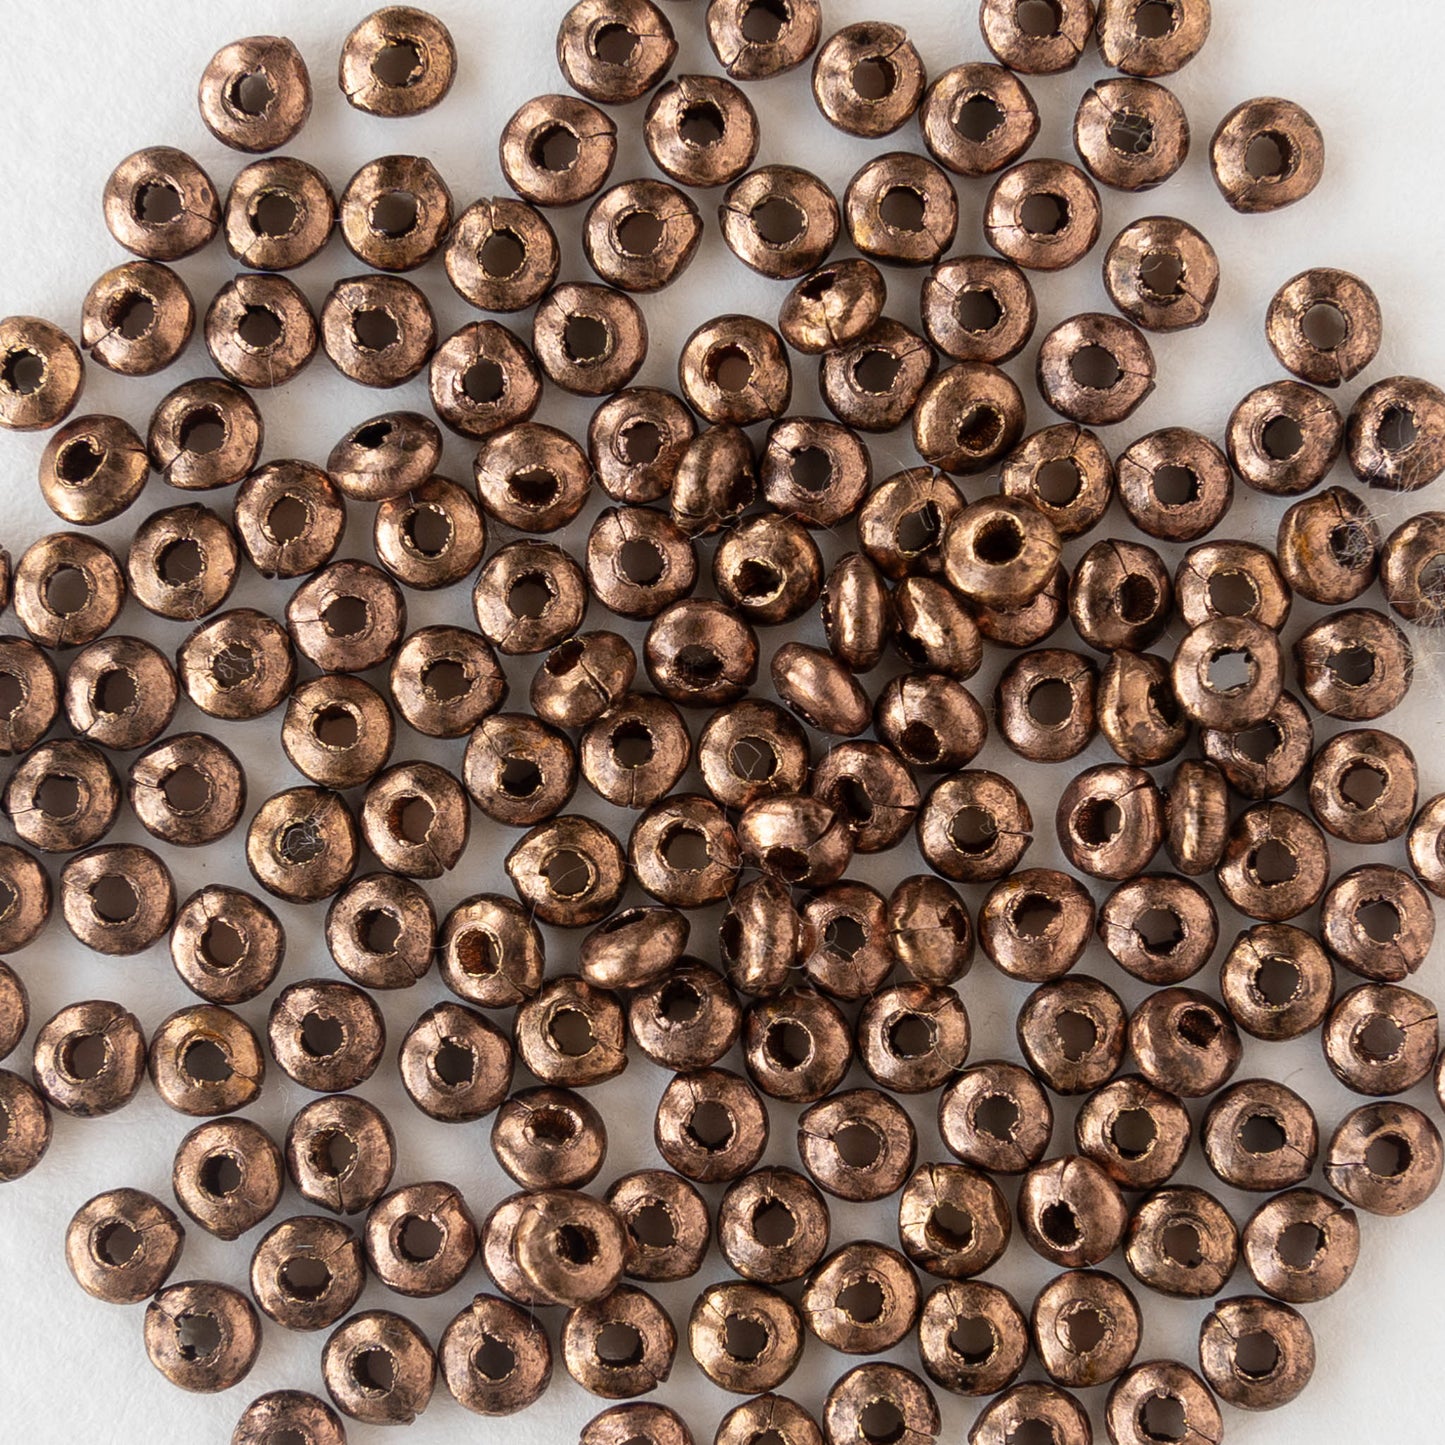 3.5mm Rondelle Disks - Oxidized Copper Plated Brass - 50